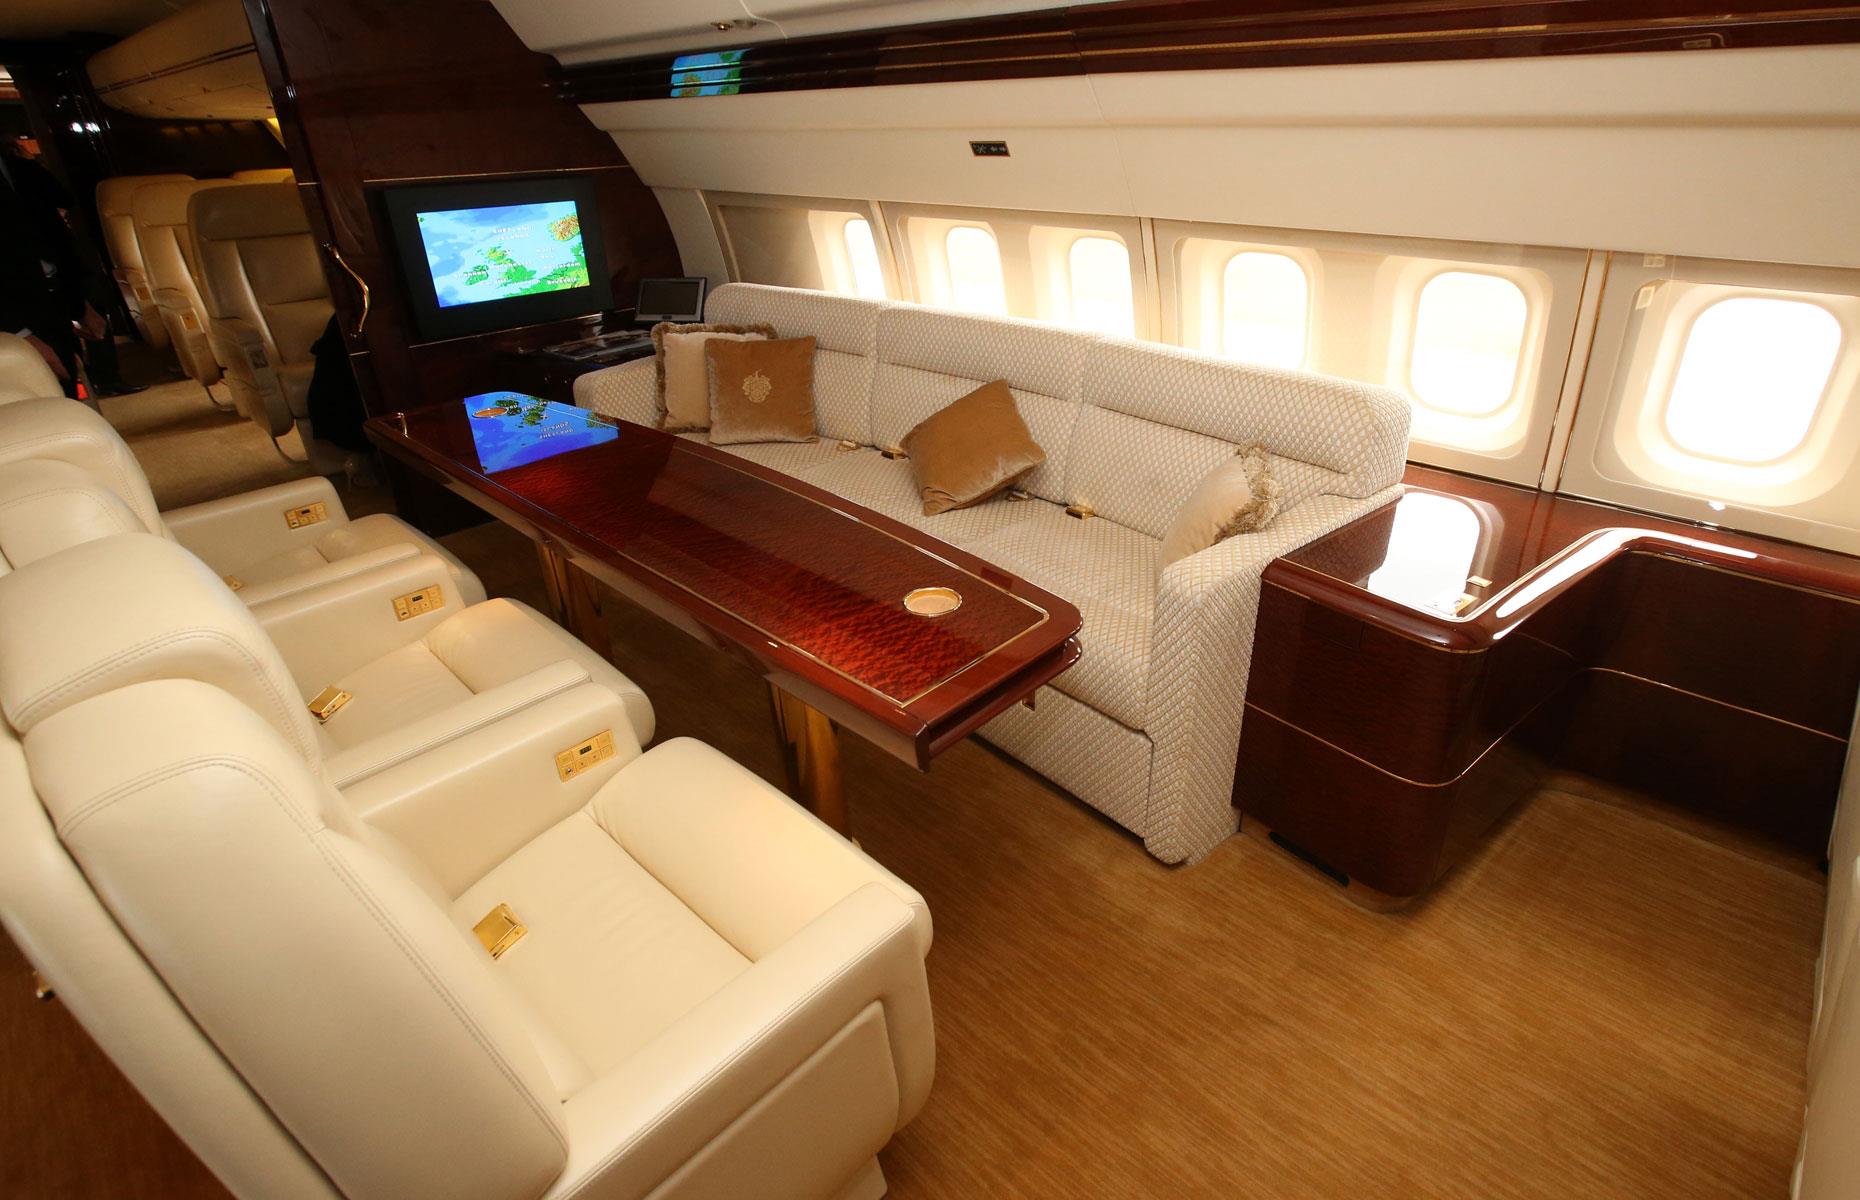 <p>The interior design of Trump's plane doesn't disappoint. The lounge area features cream leather seating that's been paired with tasteful walnut tables and cabinets.</p>  <p>The bathroom is dripping in 24-carat gold finishes and premium marble. The headrests of the plane's 43 seats are embroidered with the Trump family crest, and there's even an extra-special VIP area. Other facilities include a guest suite, a dining room, and a lounge that boasts a complete cinema entertainment system.</p>  <p>Trump's plane stayed grounded during his presidency as it lacks many of the security features of presidential jet Air Force One (which we'll see later). However, the 757 has been repainted and refurbished since he left office, and Trump has recently started using his plane once more.</p>